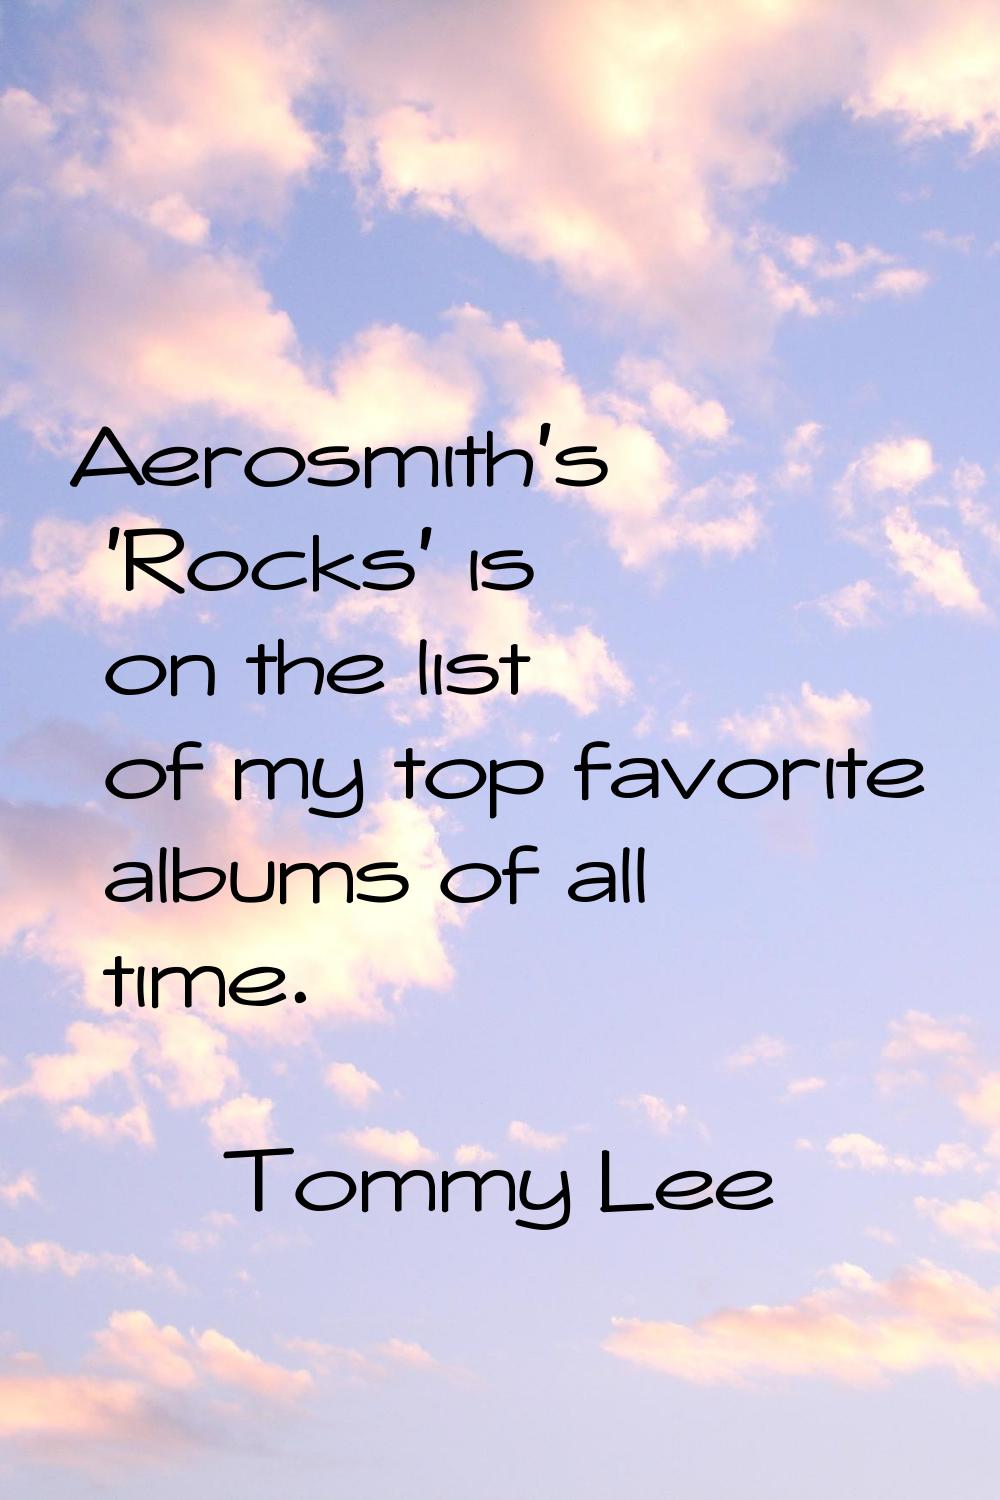 Aerosmith's 'Rocks' is on the list of my top favorite albums of all time.